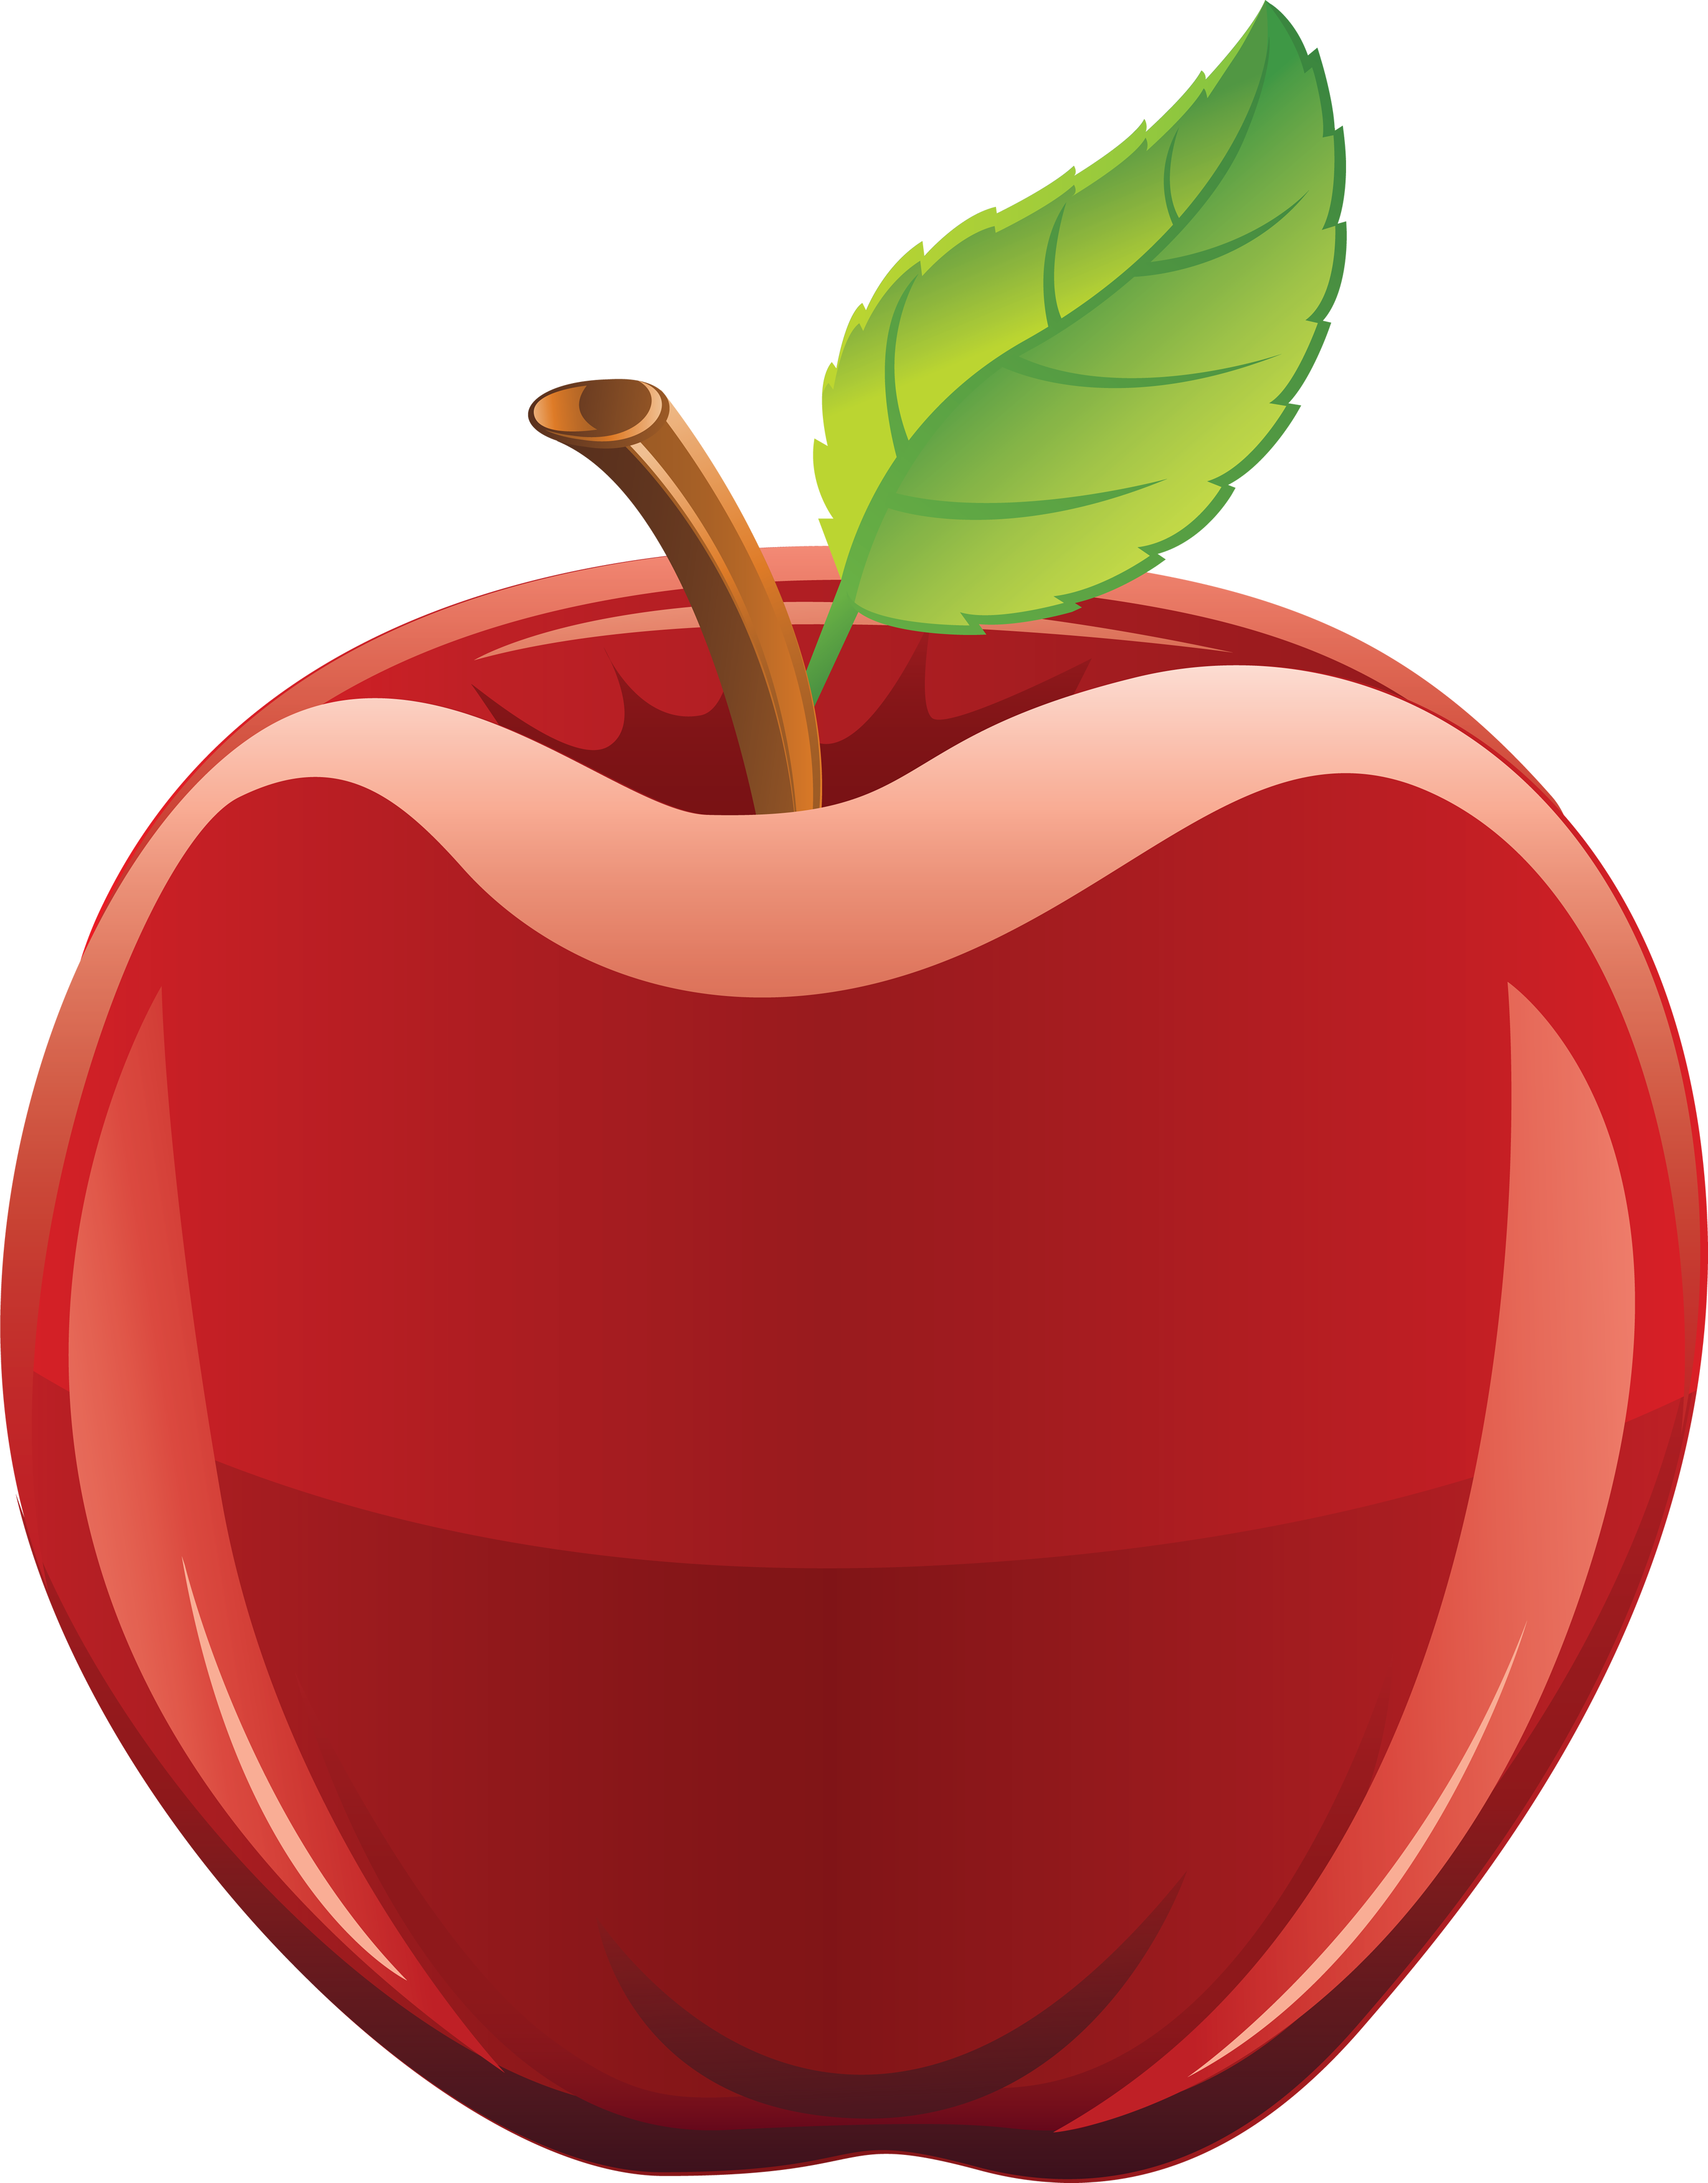 Red apple clipart free clipart images